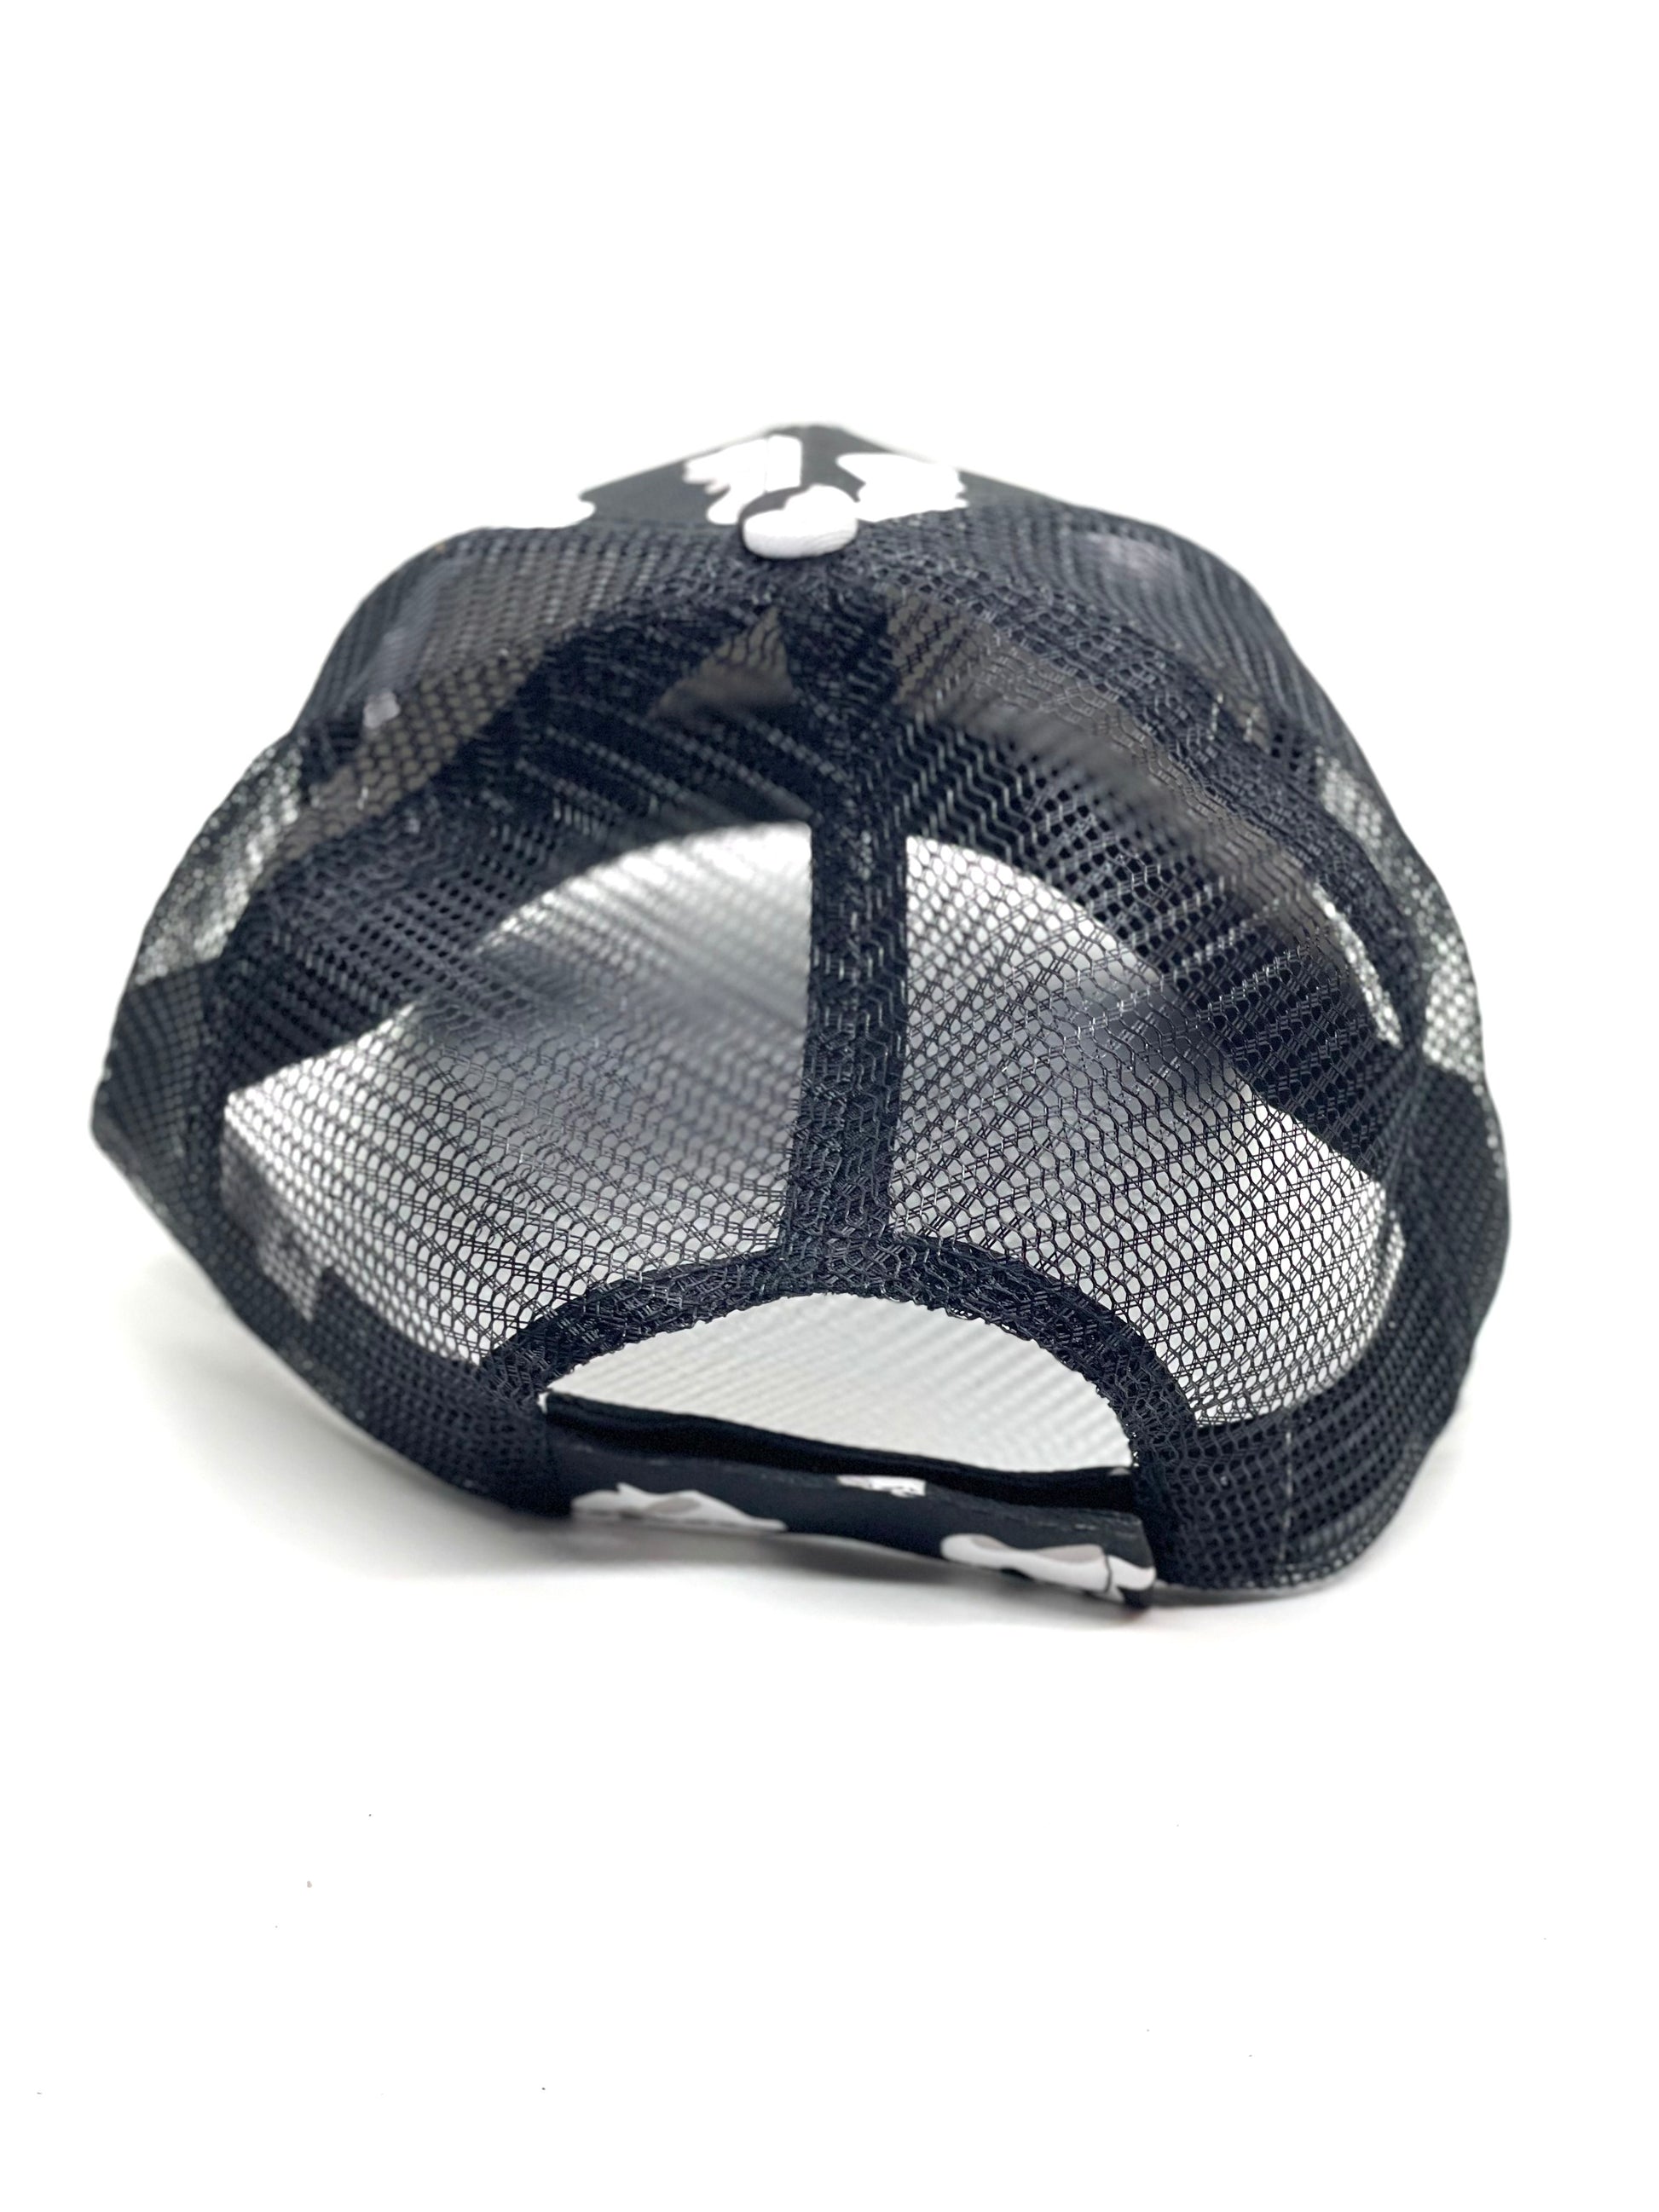 R8 - Cow print black and white Hat Black/Black - Patches Of Upcycling